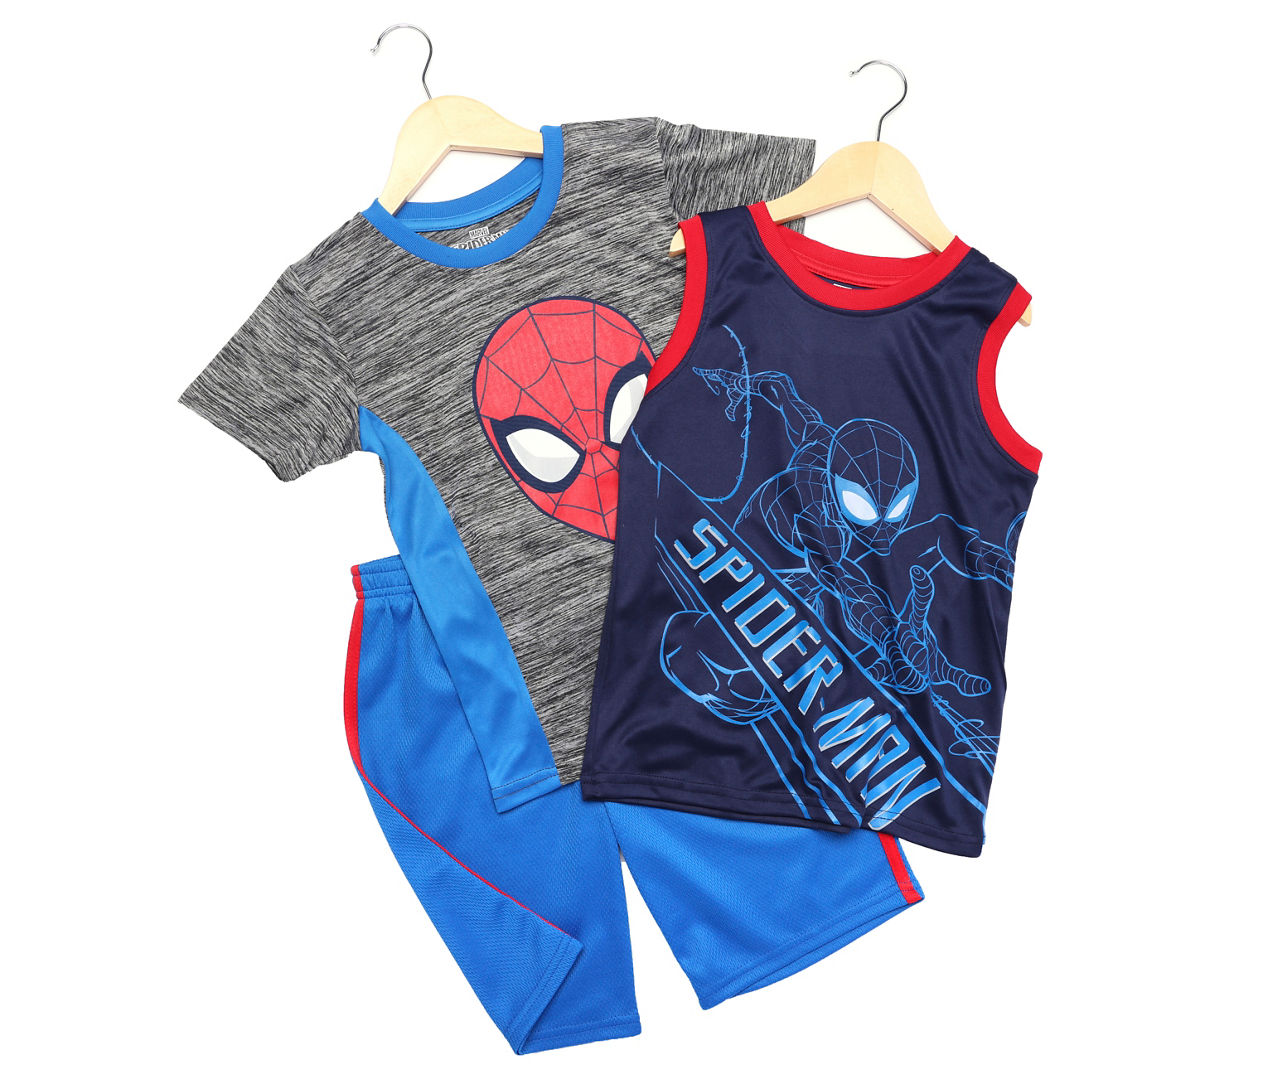 Toddler Size 3T Blue, Red & Gray Spidey 3-Piece Performance Outfit